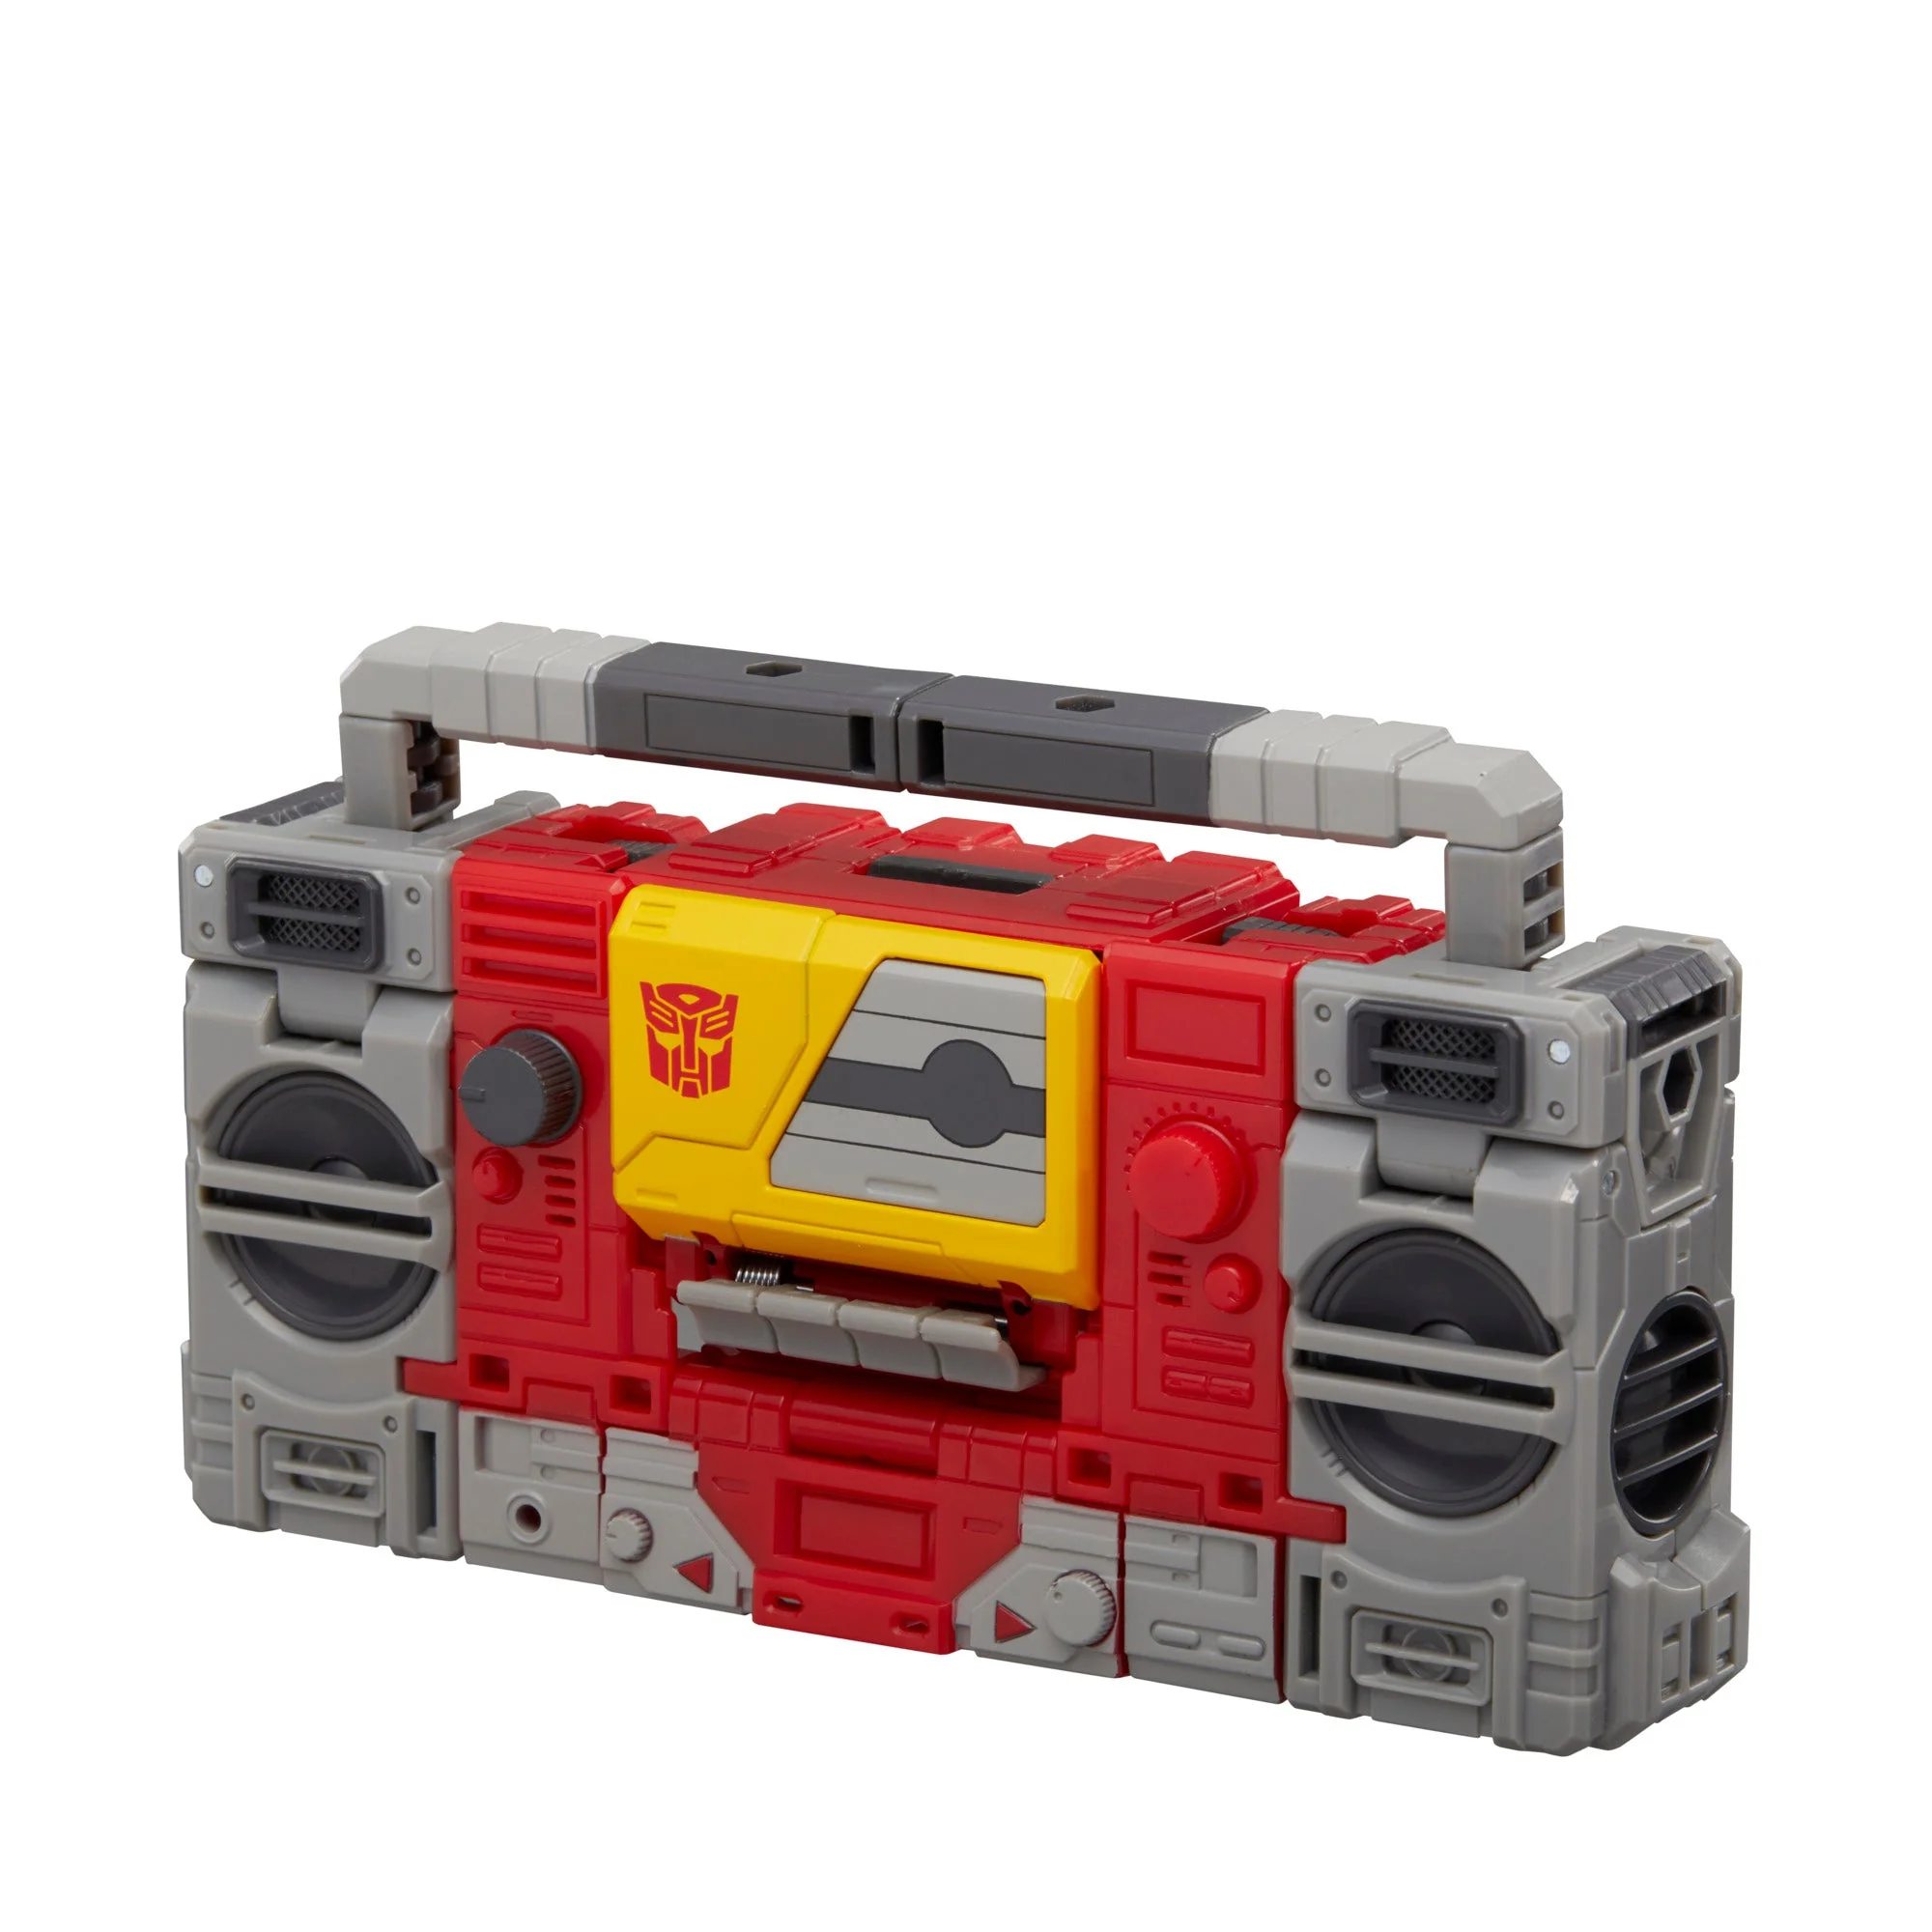 The Transformers The Movie Studio Series 86 25 Autobot Blaster Eject 10